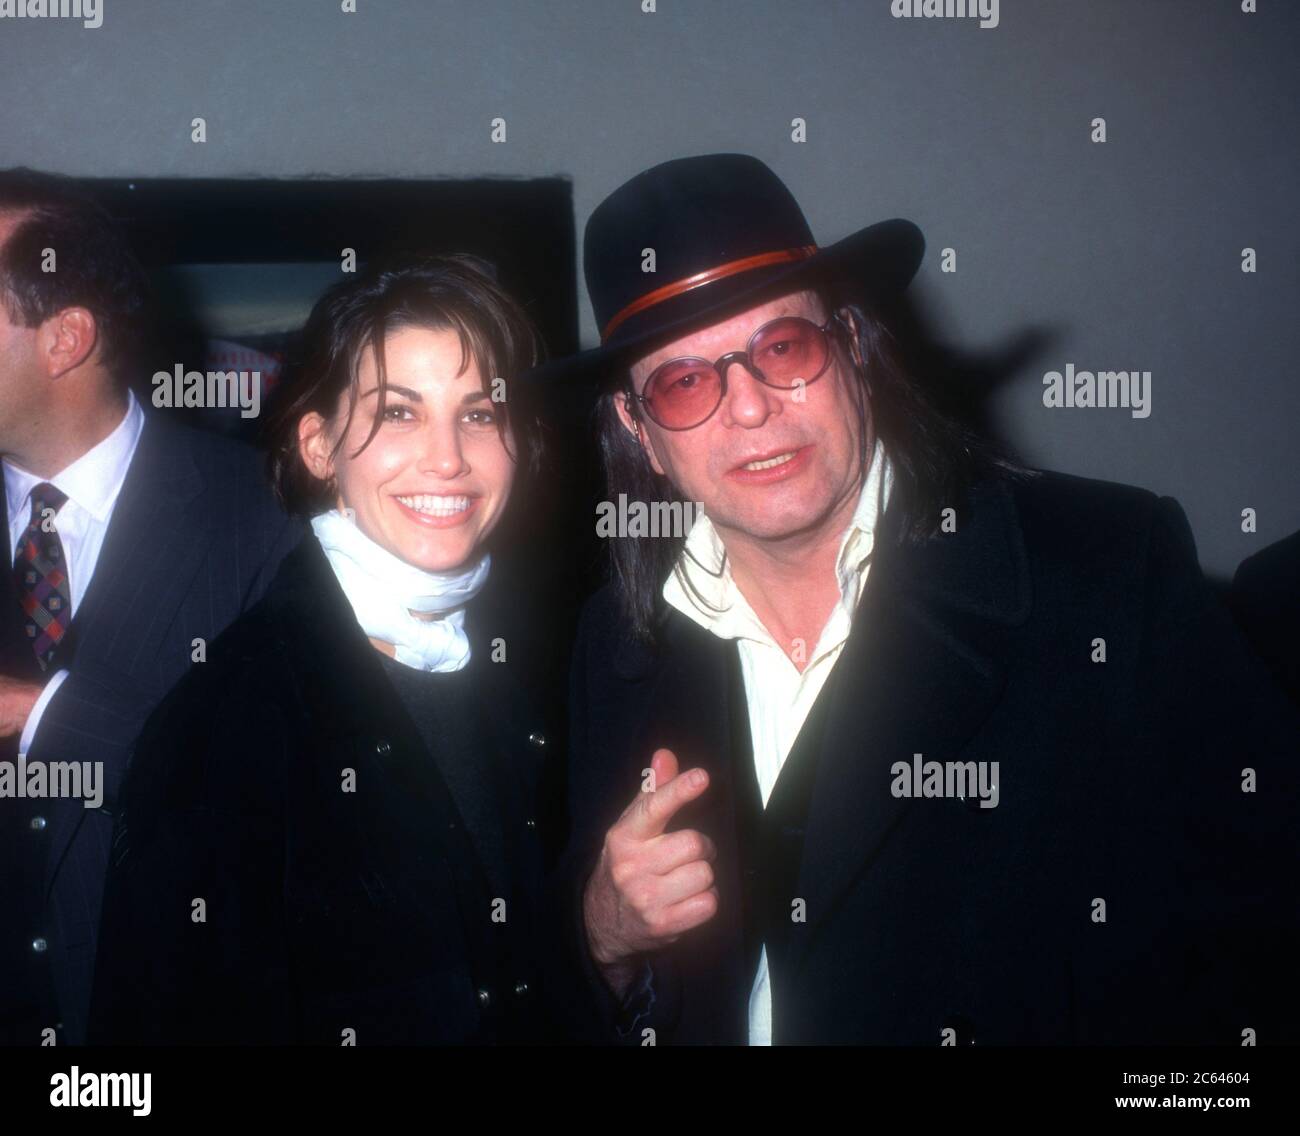 Westwood, California, USA 13th December 1995 Actress Gina Gershon and director Terry Gilliam attend Universal Pictures' '12 Monkeys' Premiere on December 13, 1995 at Mann Bruin Theatre in Westwood, California, USA. Photo by Barry King/Alamy Stock Photo Stock Photo